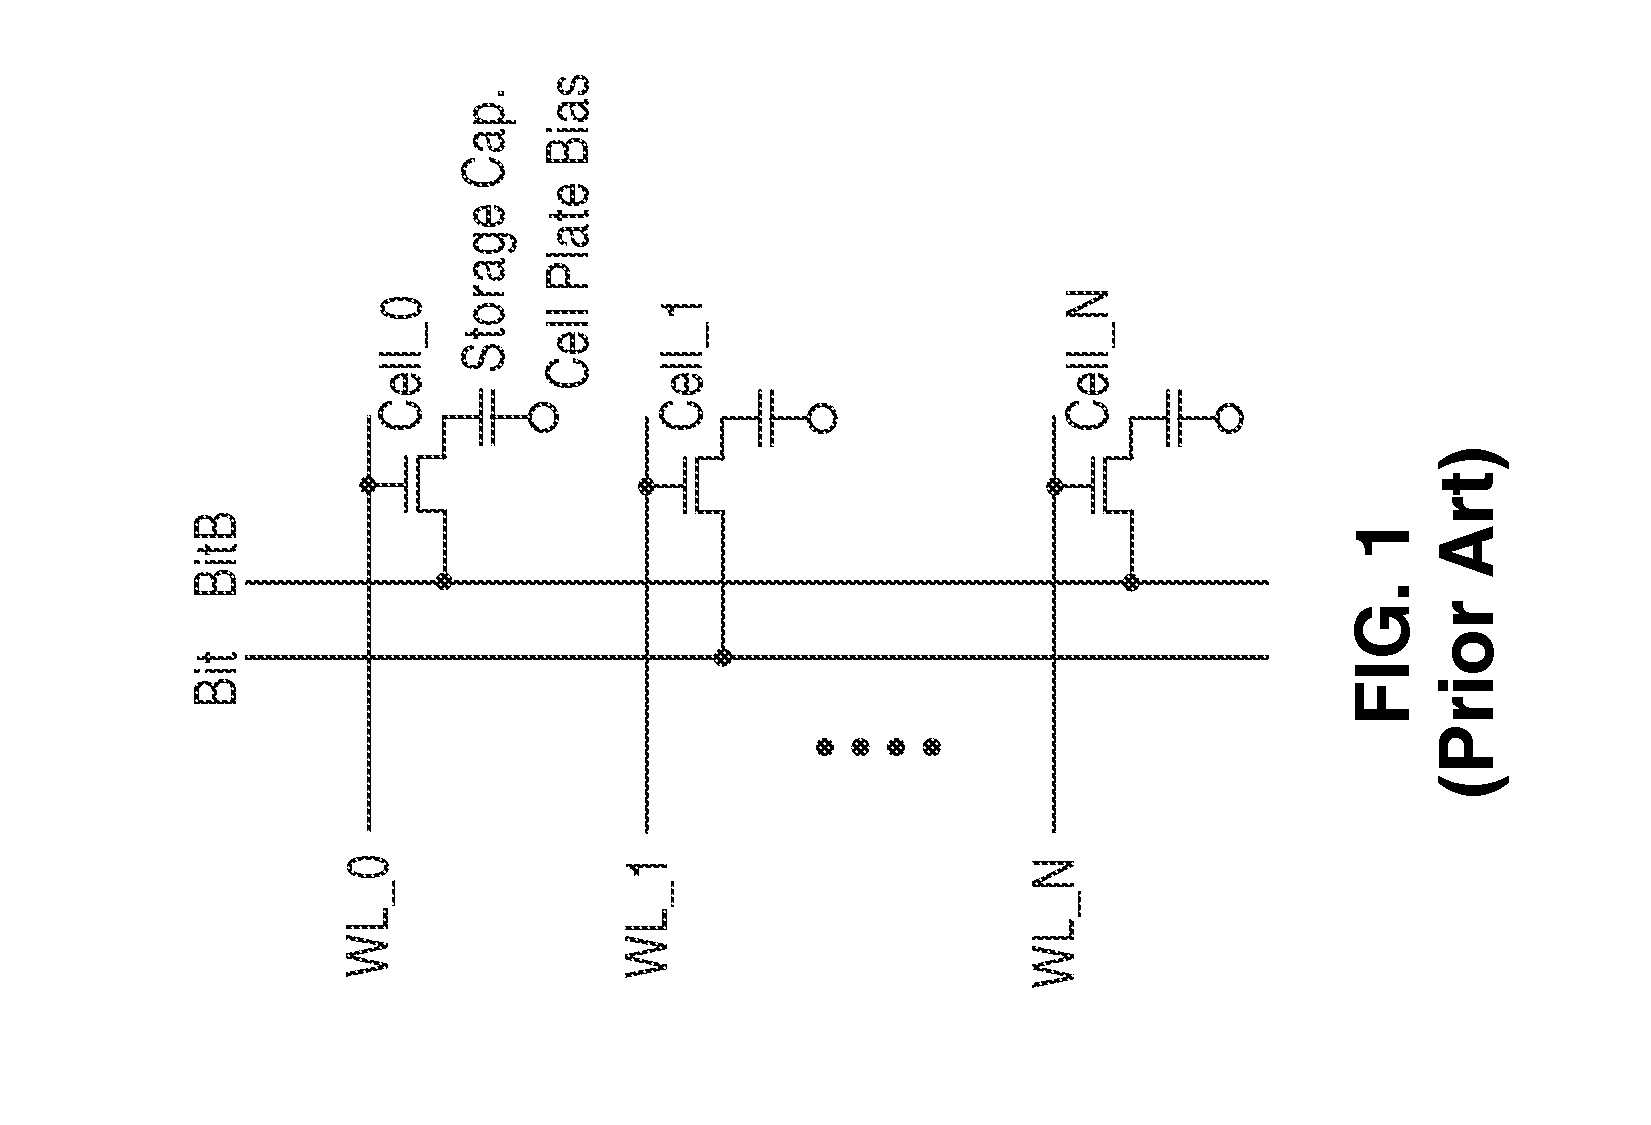 Dynamic memory refresh configurations and leakage control methods